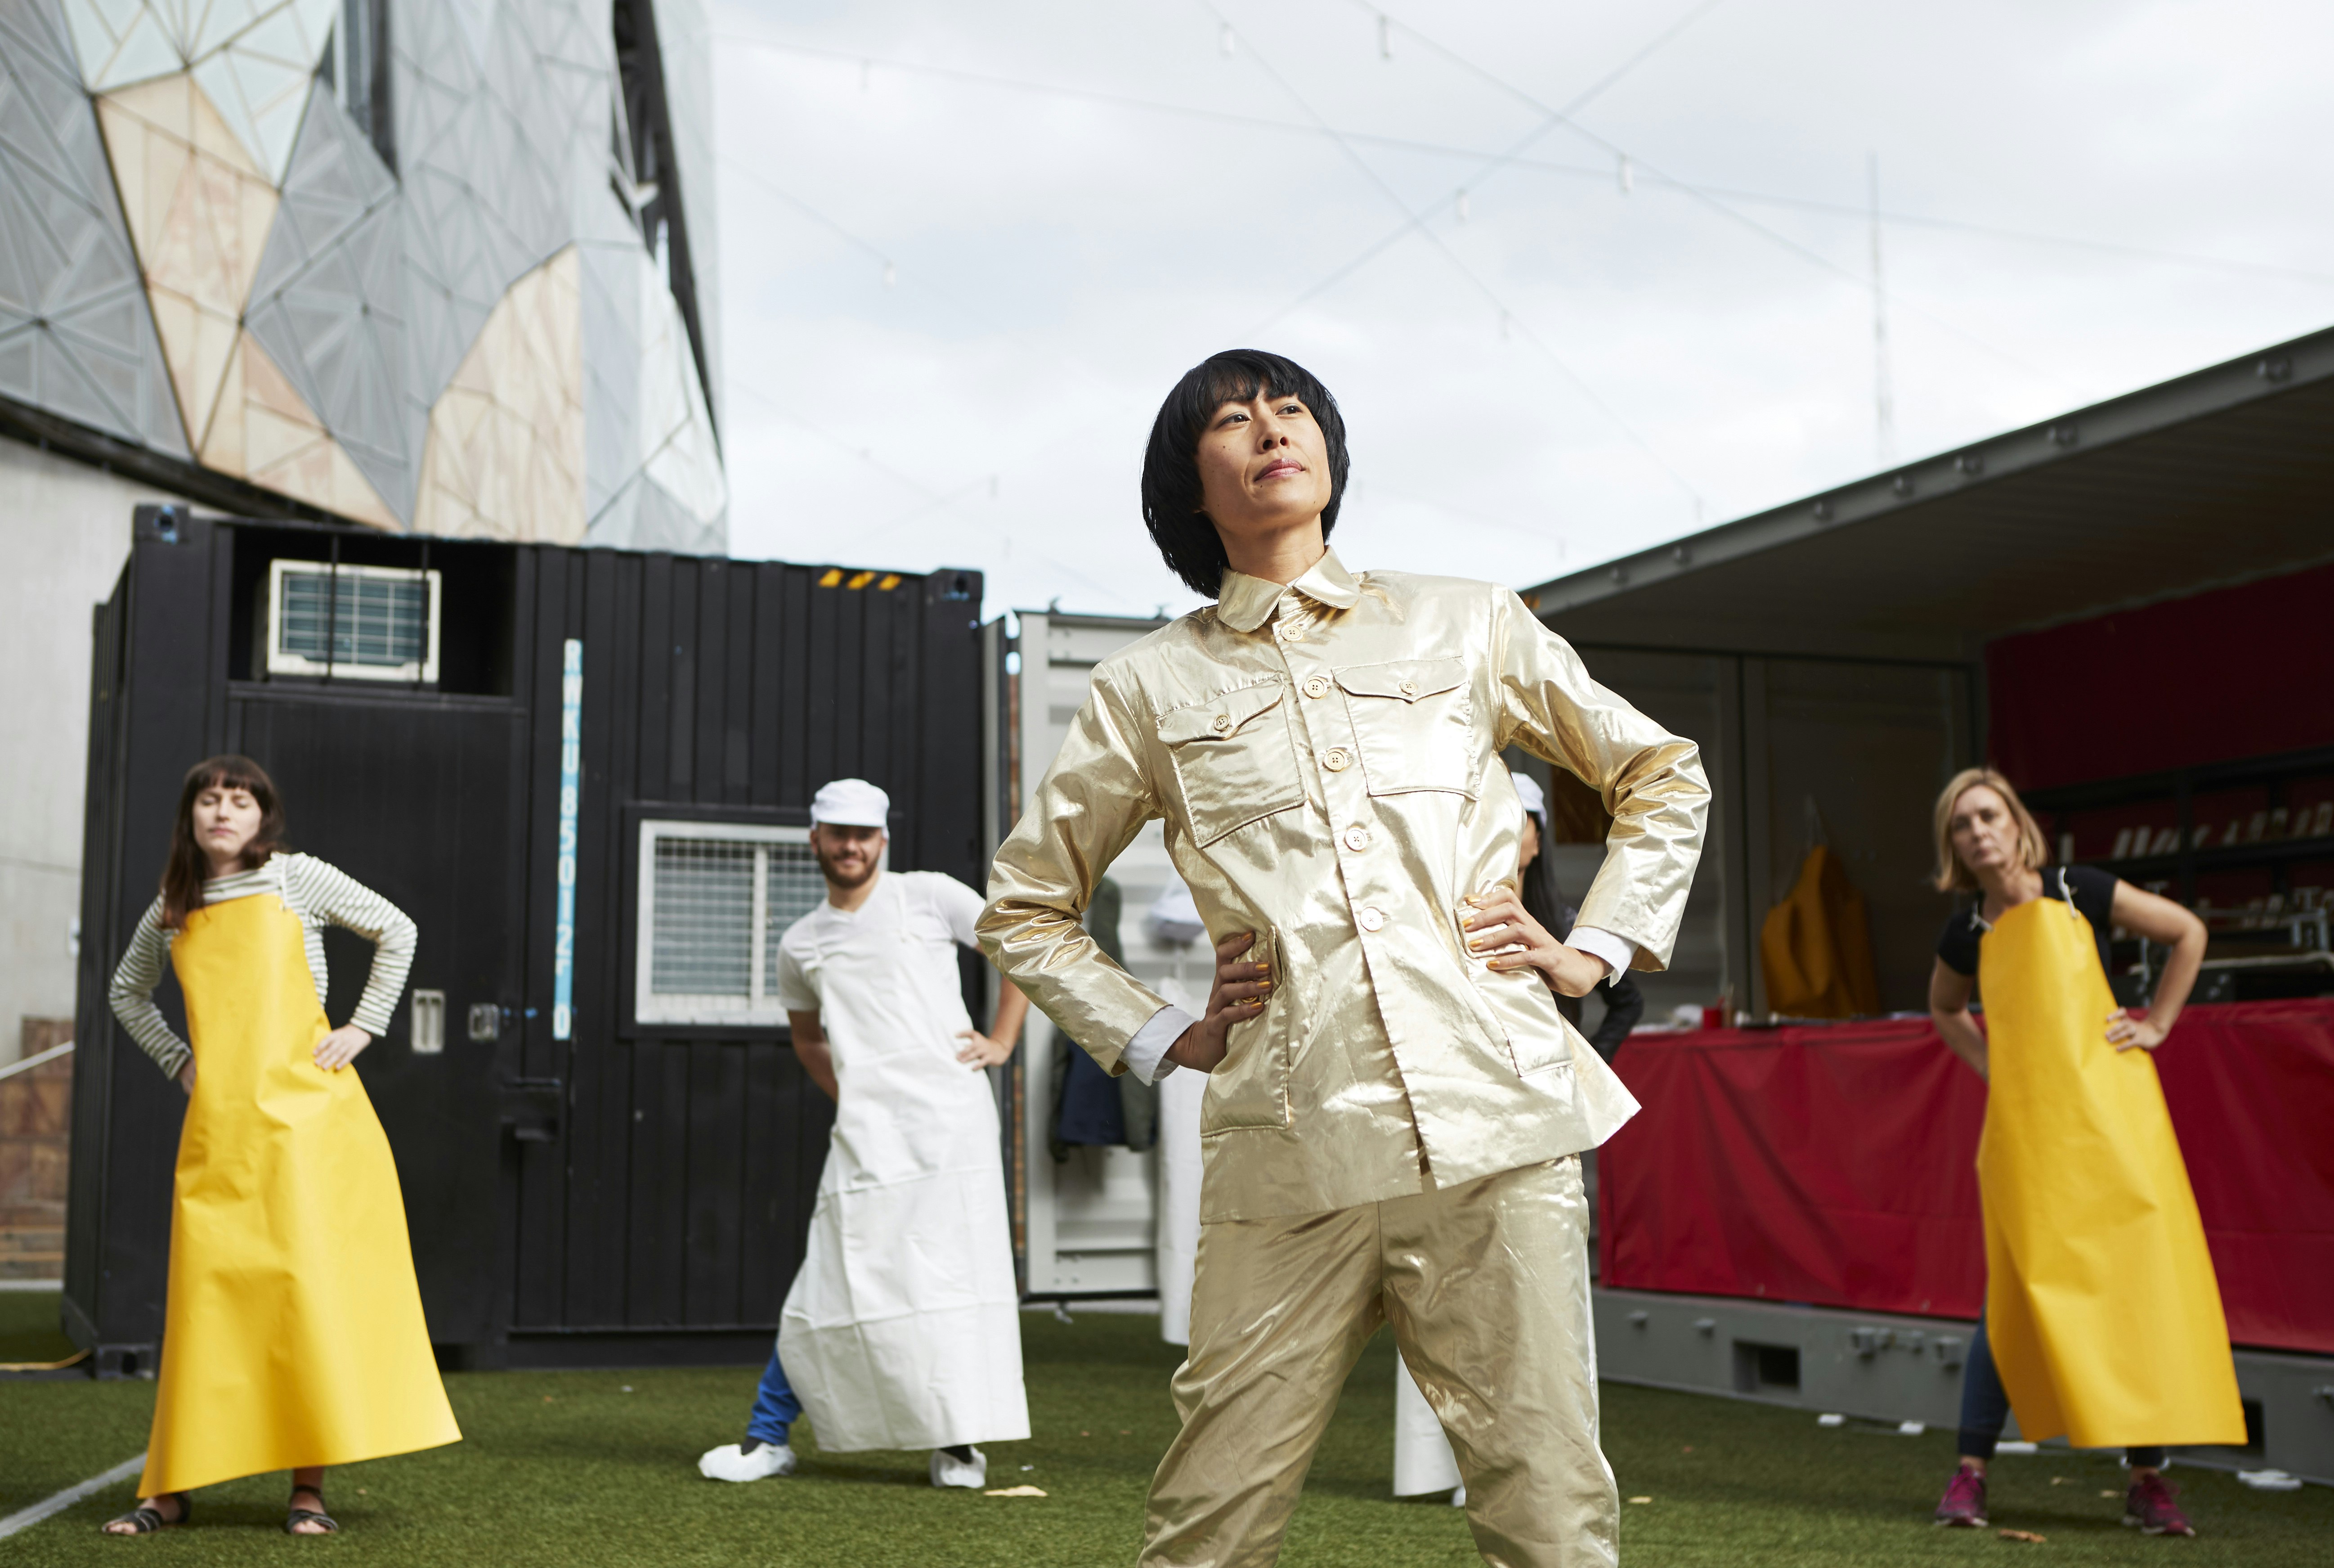 A female-presenting artist dressed in a gold suit stands with their hands on their hips, gazing off camera. Behind them is a line of 'workers' dressed in aprons, with their hands on their hips.